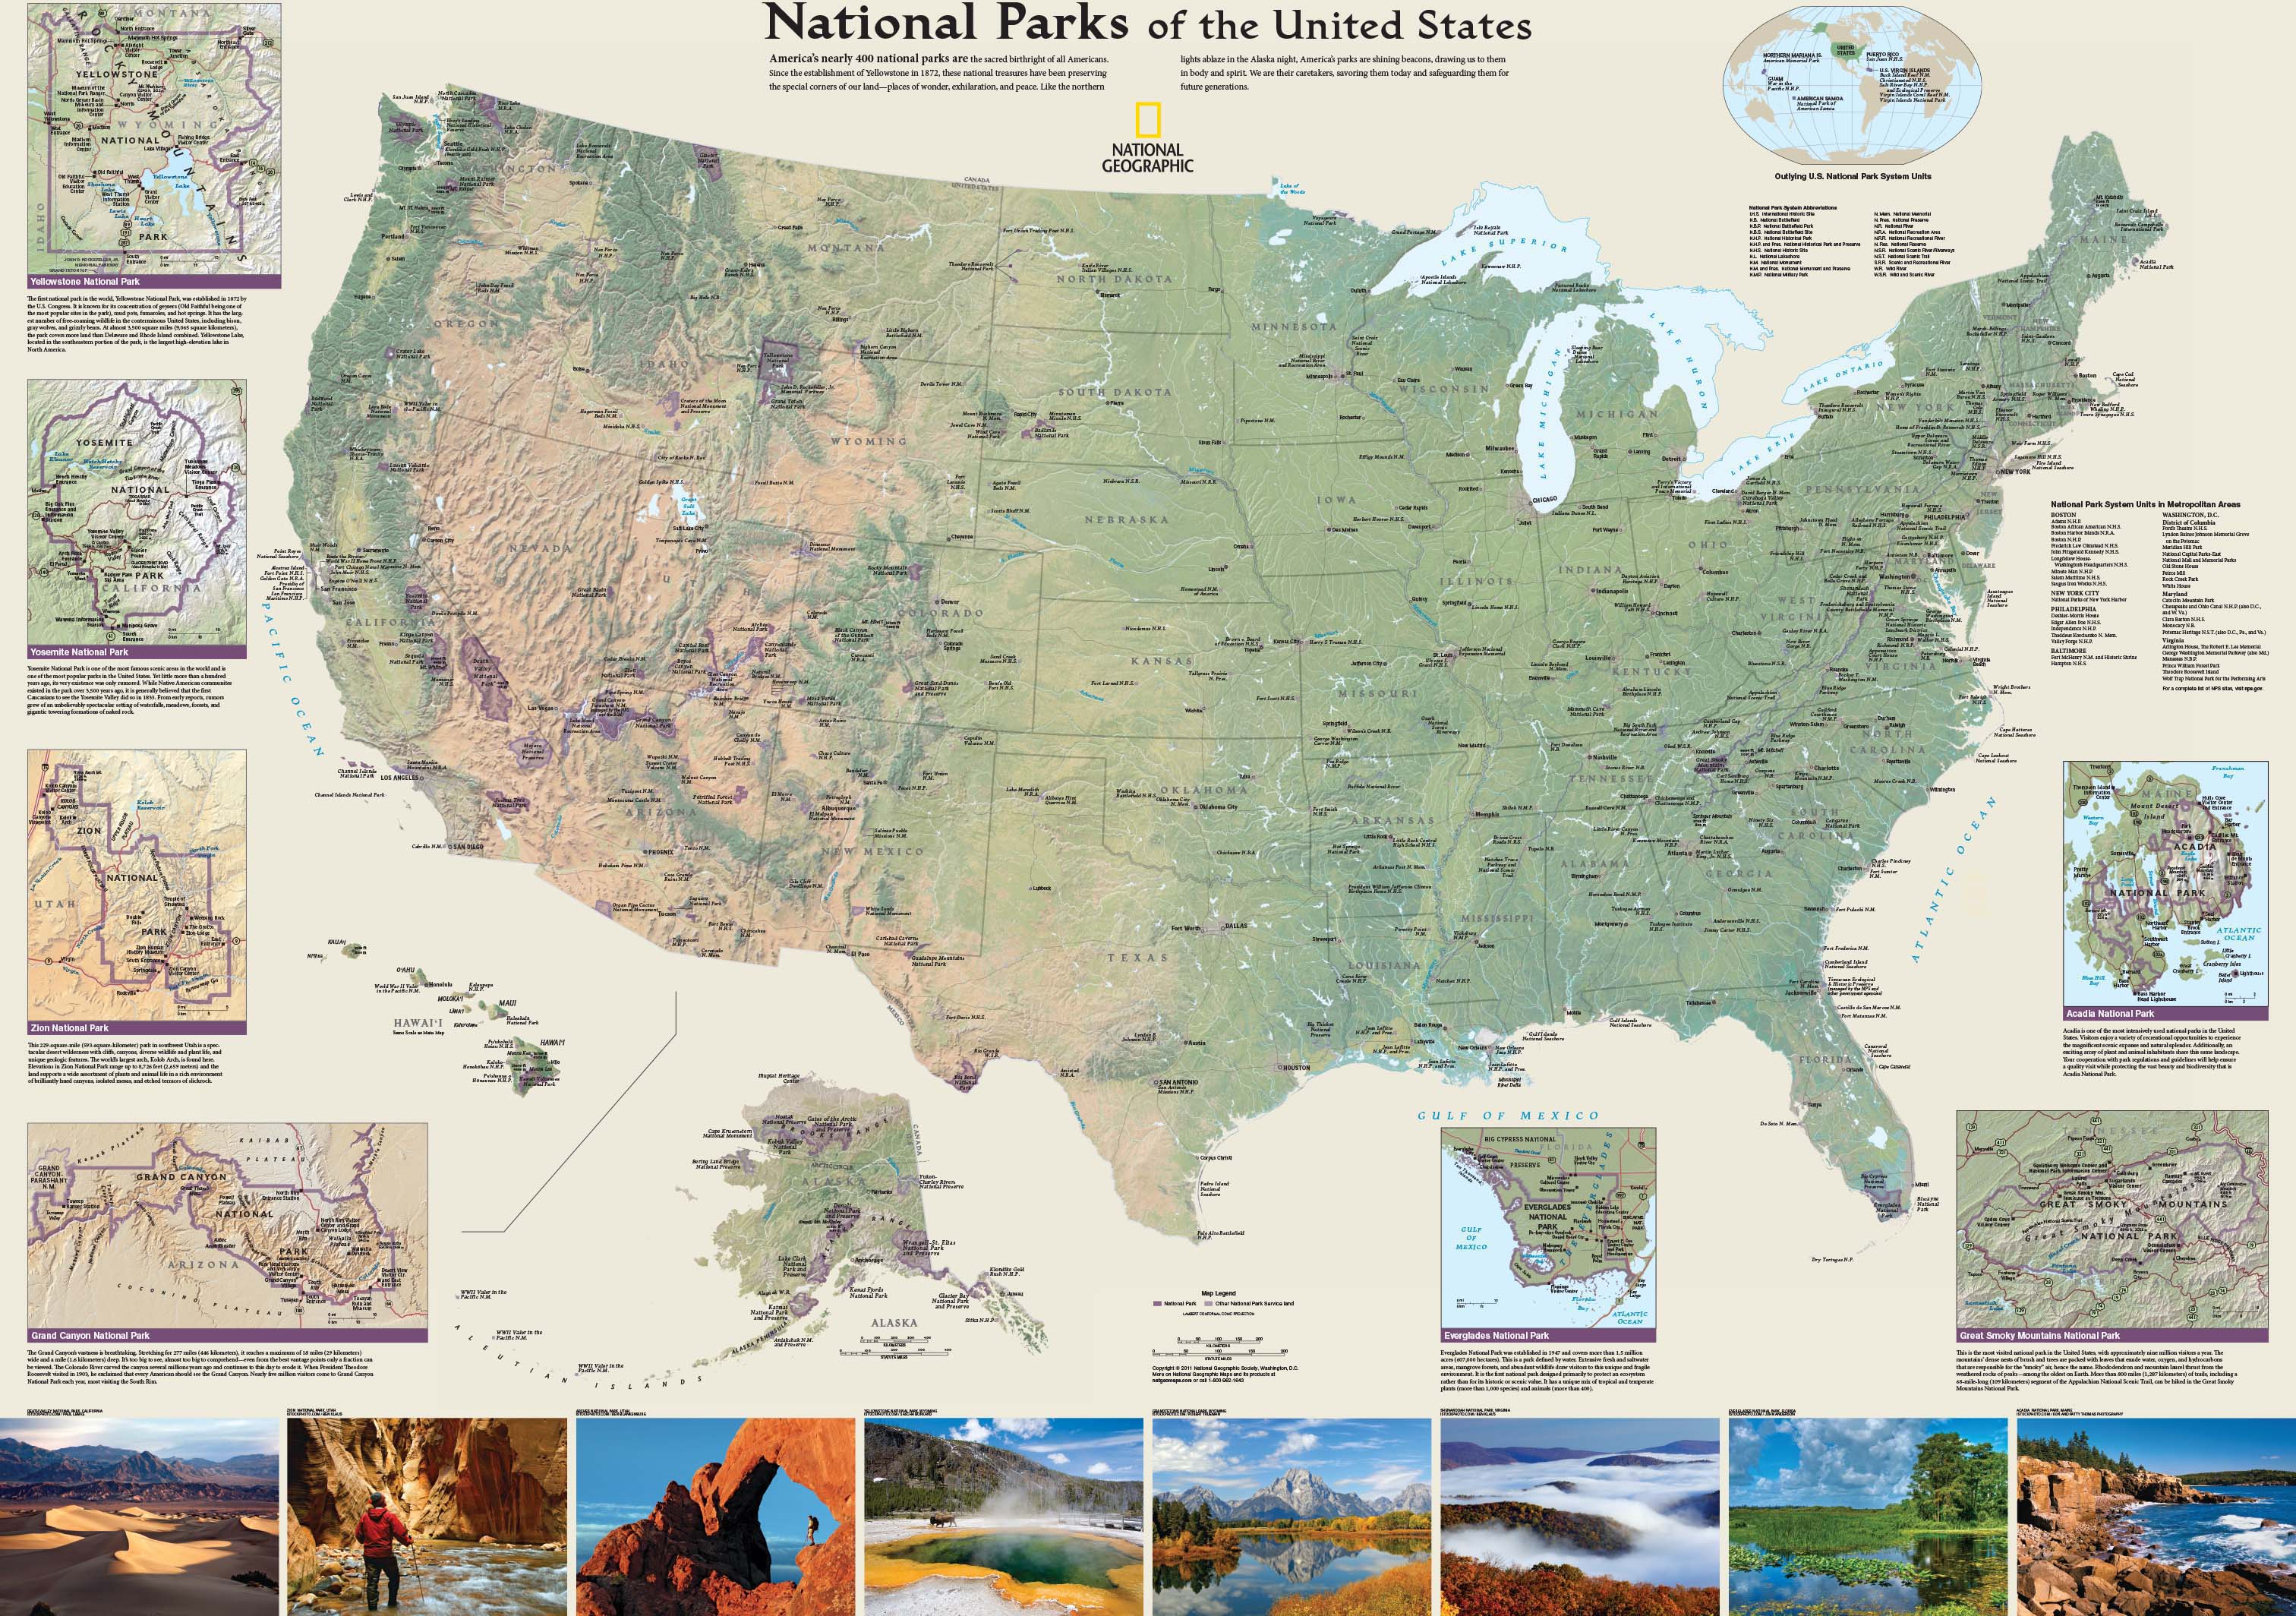 US National Parks Map